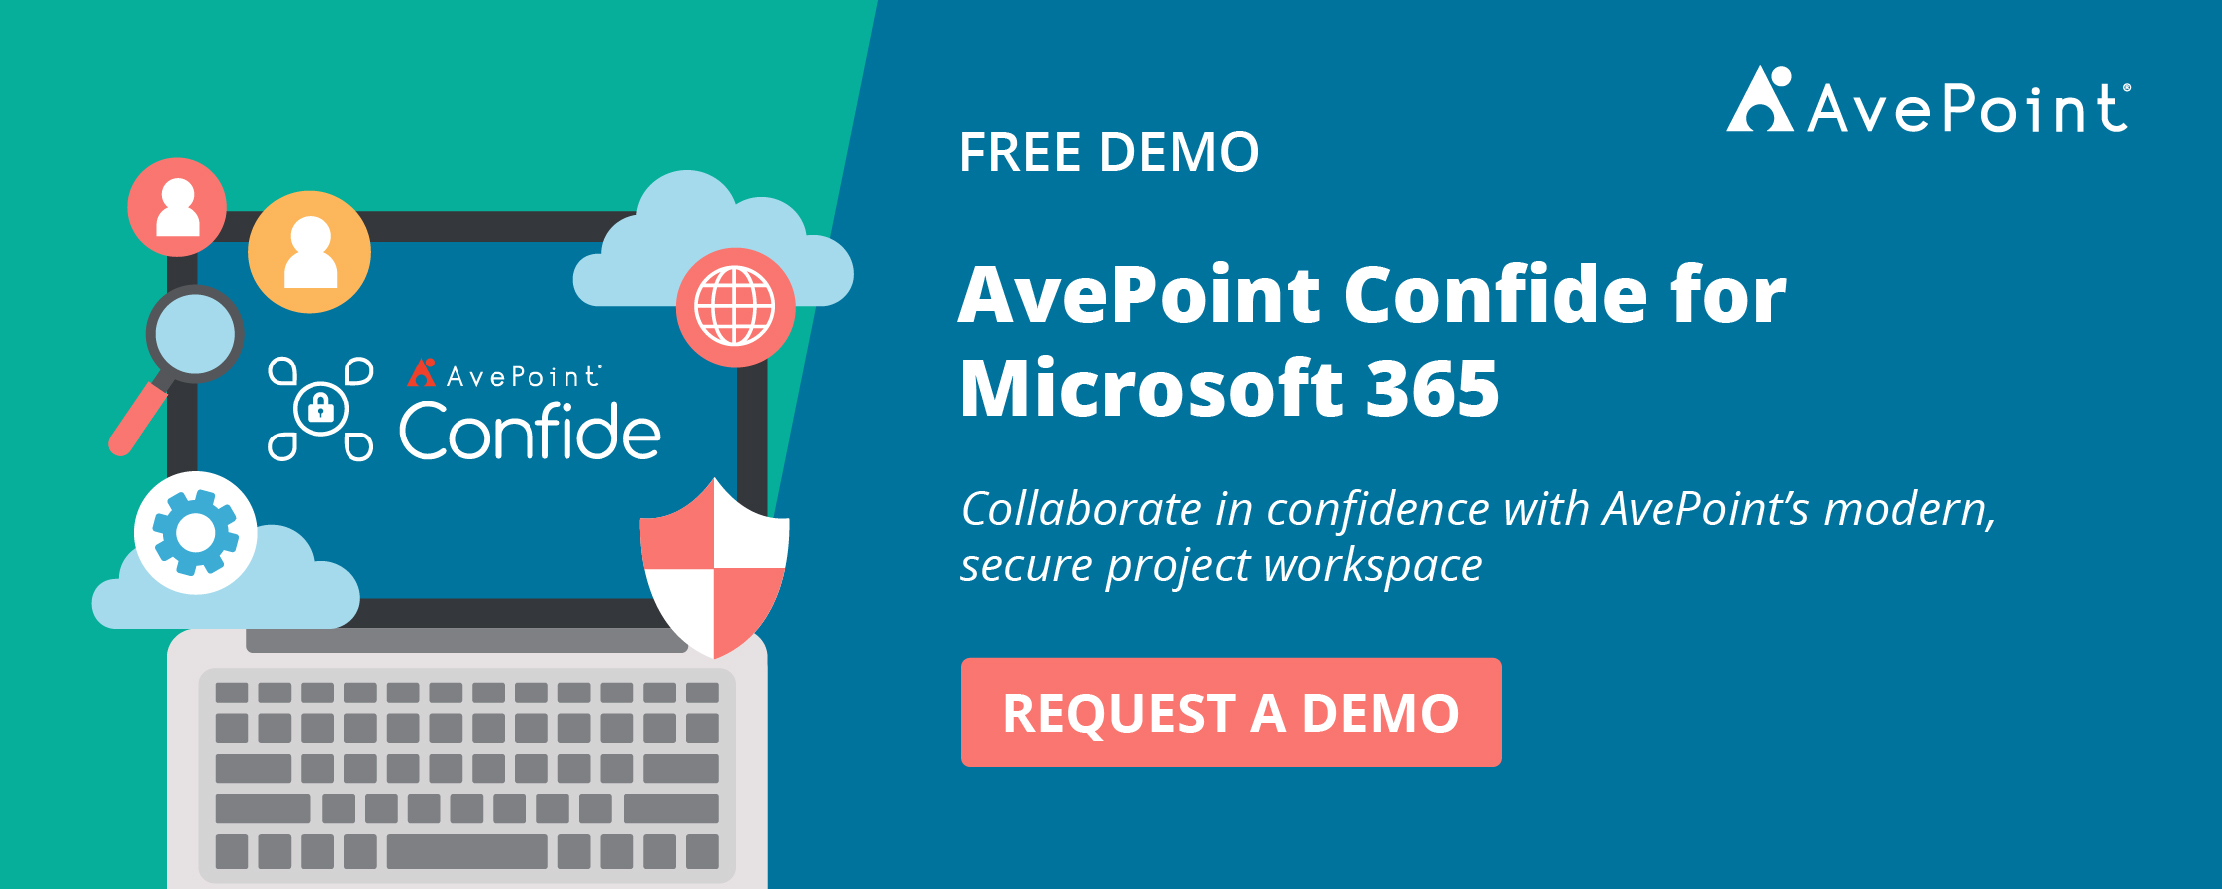 avepoint-confide-secure-project-workspace